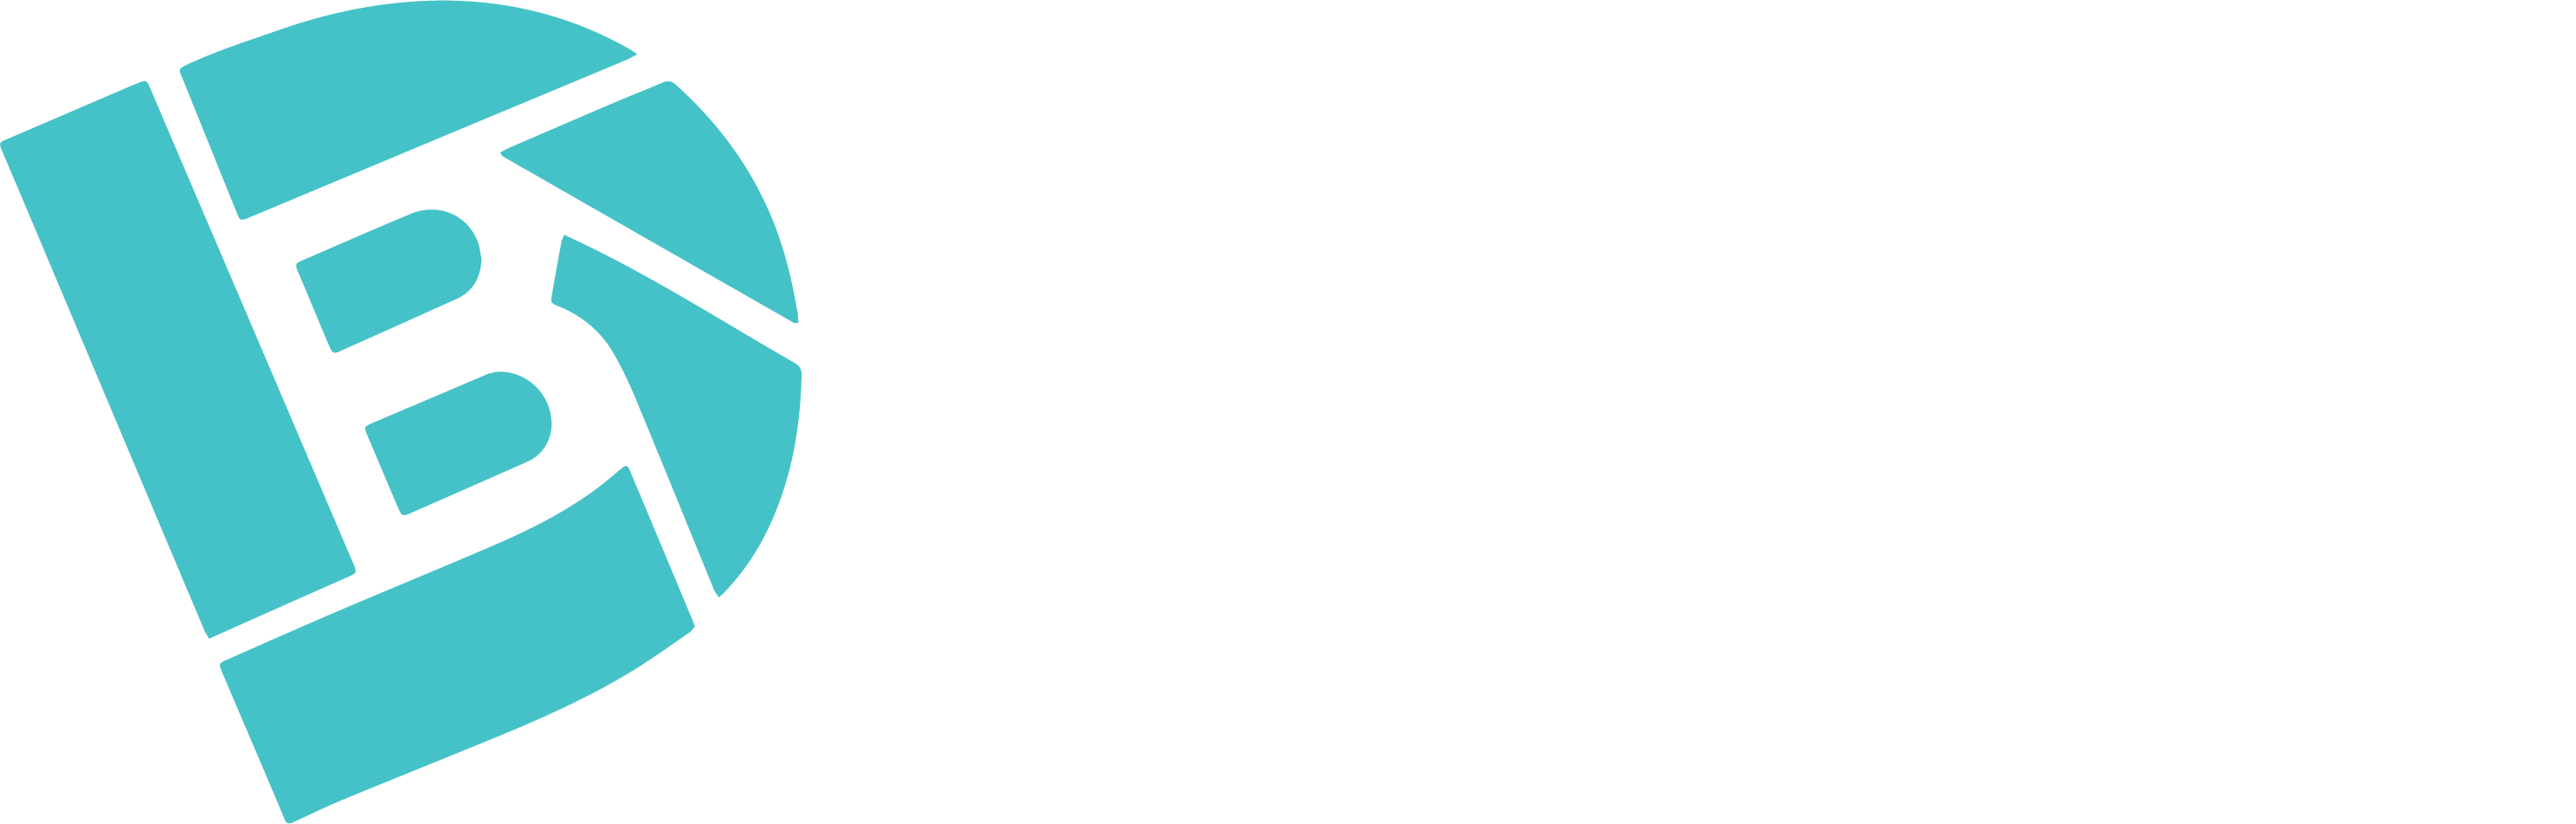 Disciple Built Logo Teal and White (RGB)